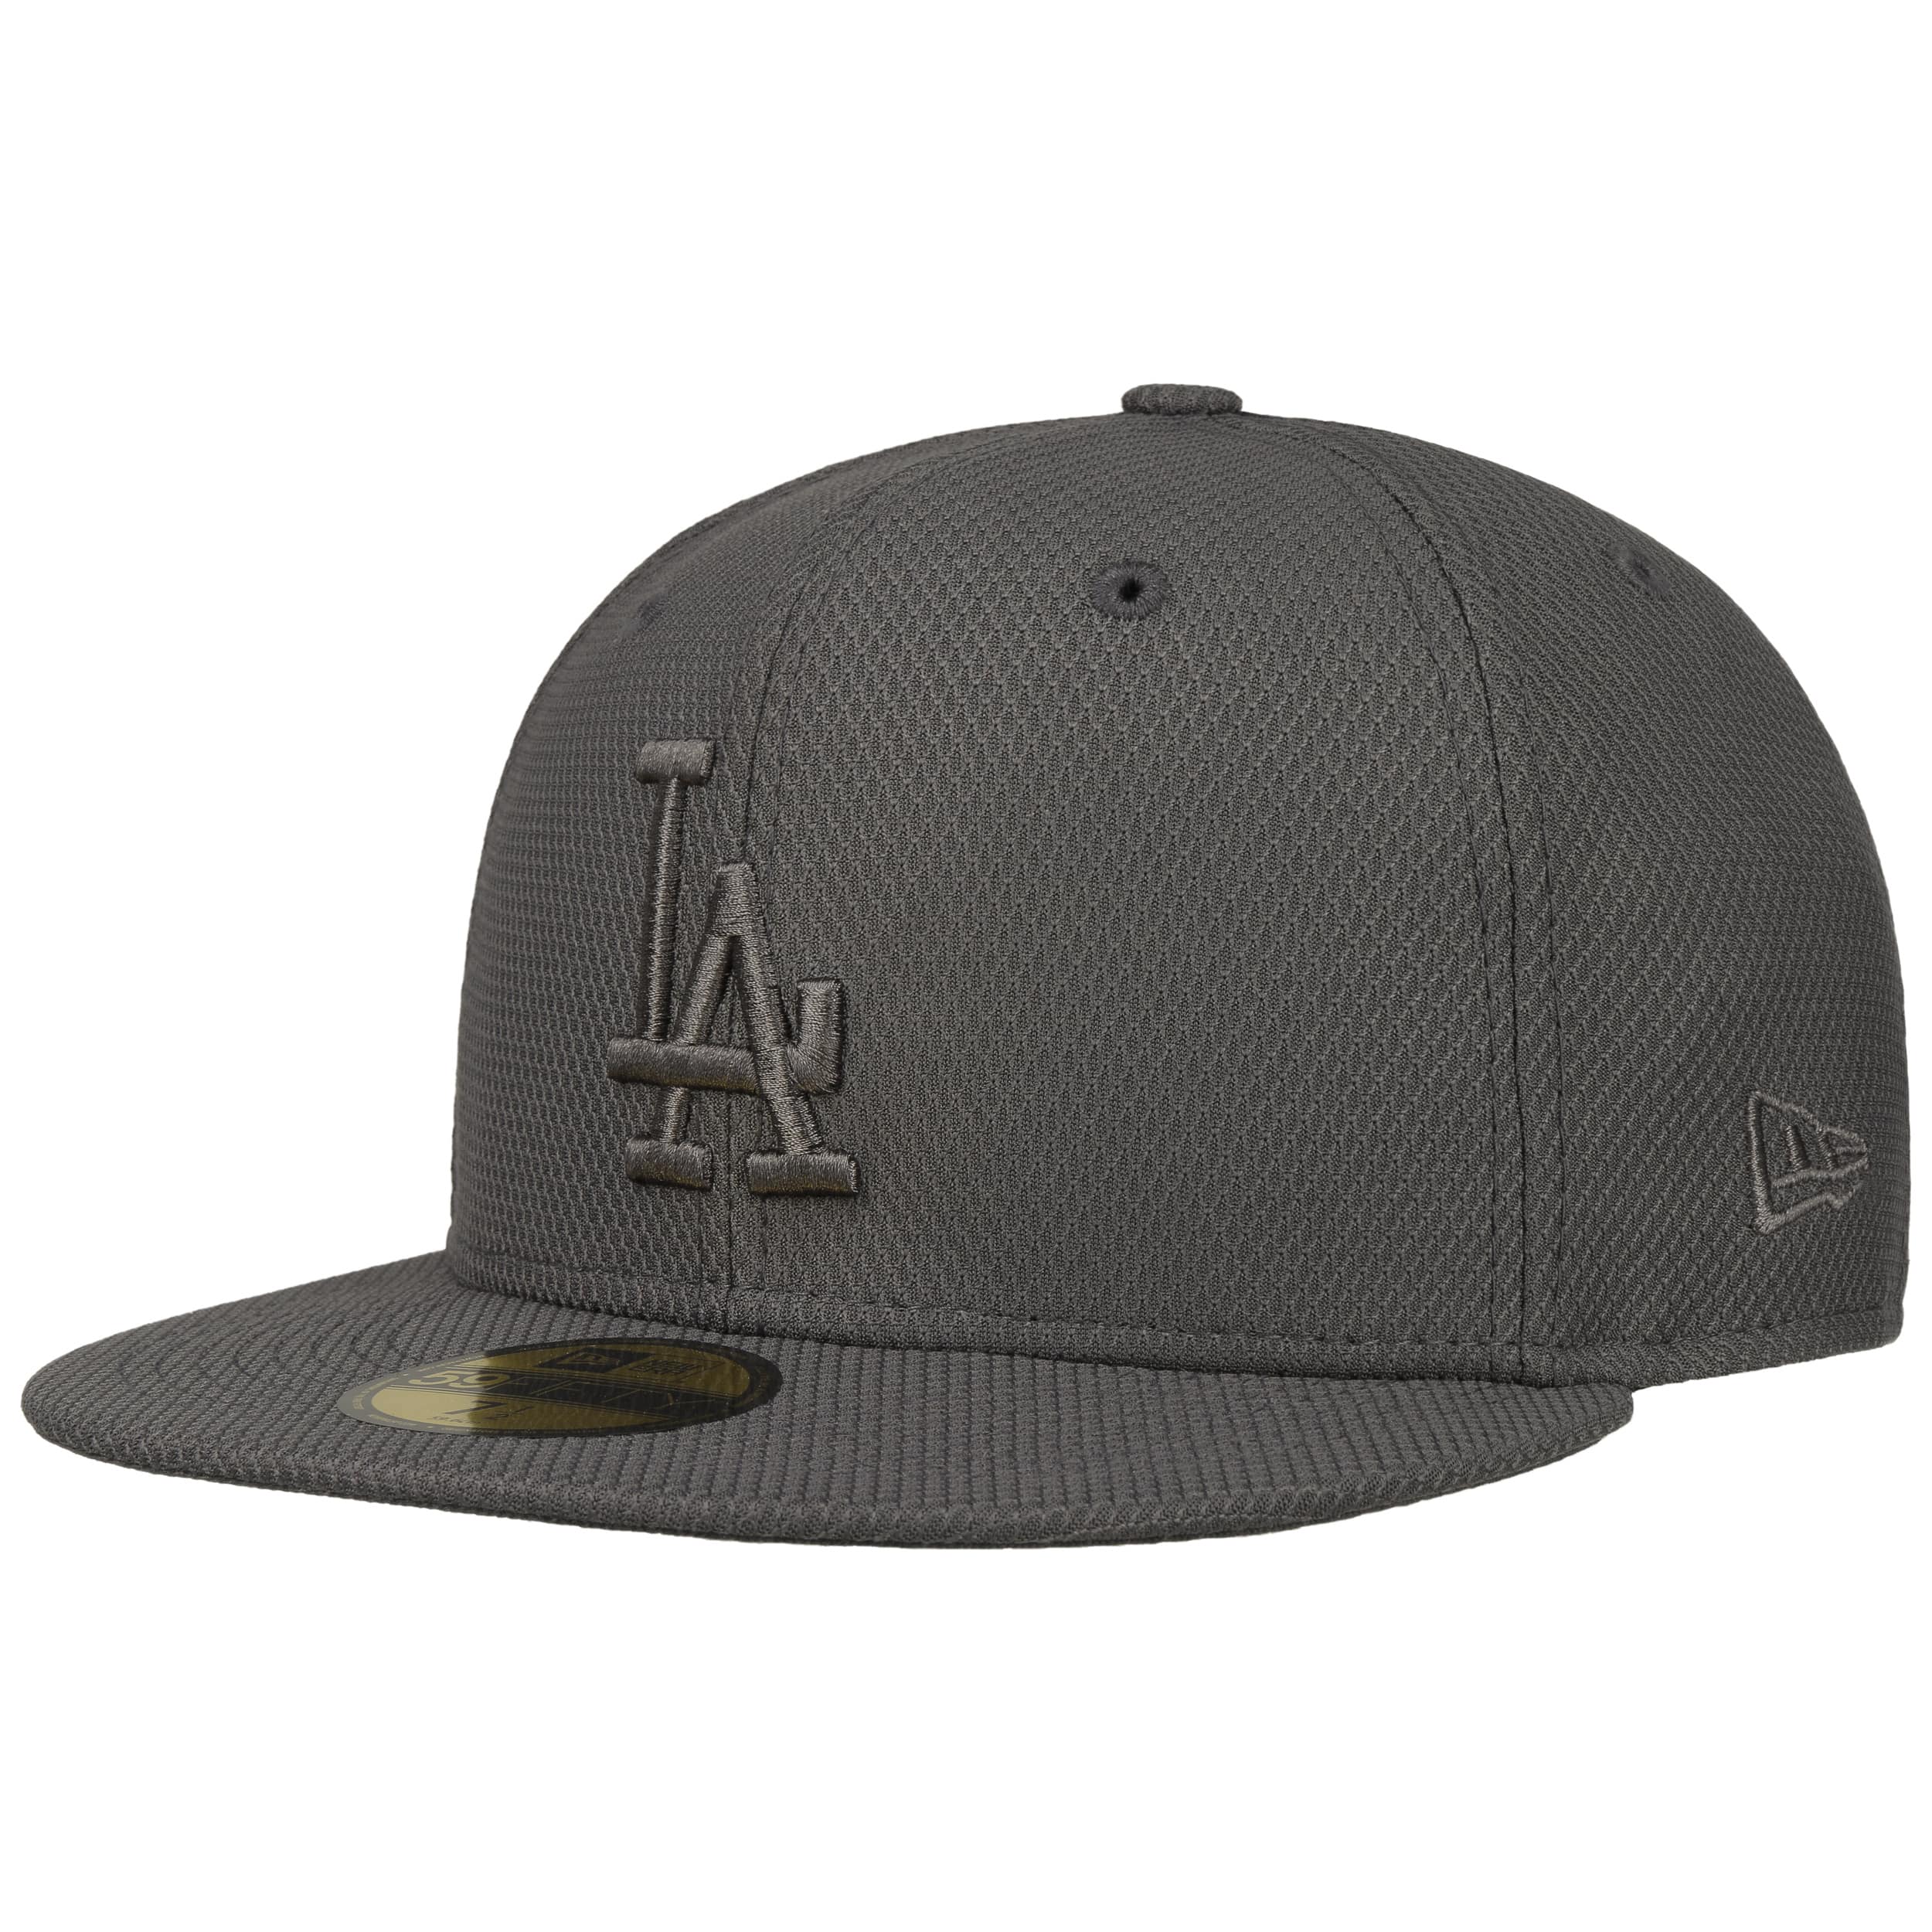 New Era 59Fifty MLB Basic Fitted Cap  Los Angeles DodgersStorm Grey  New  Star